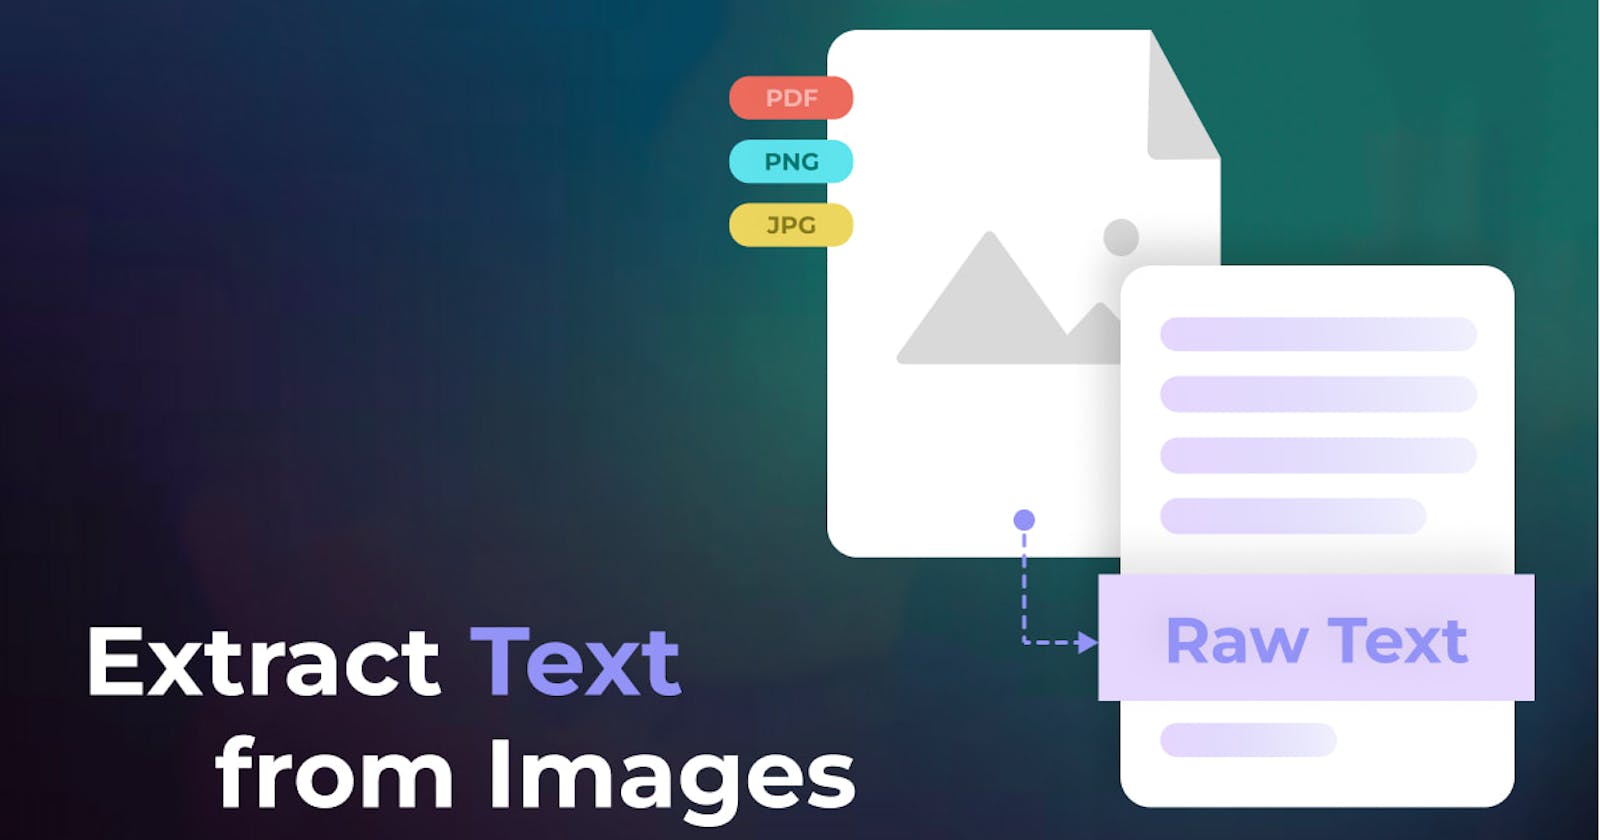 Image to Text: How to Extract Text From An Image